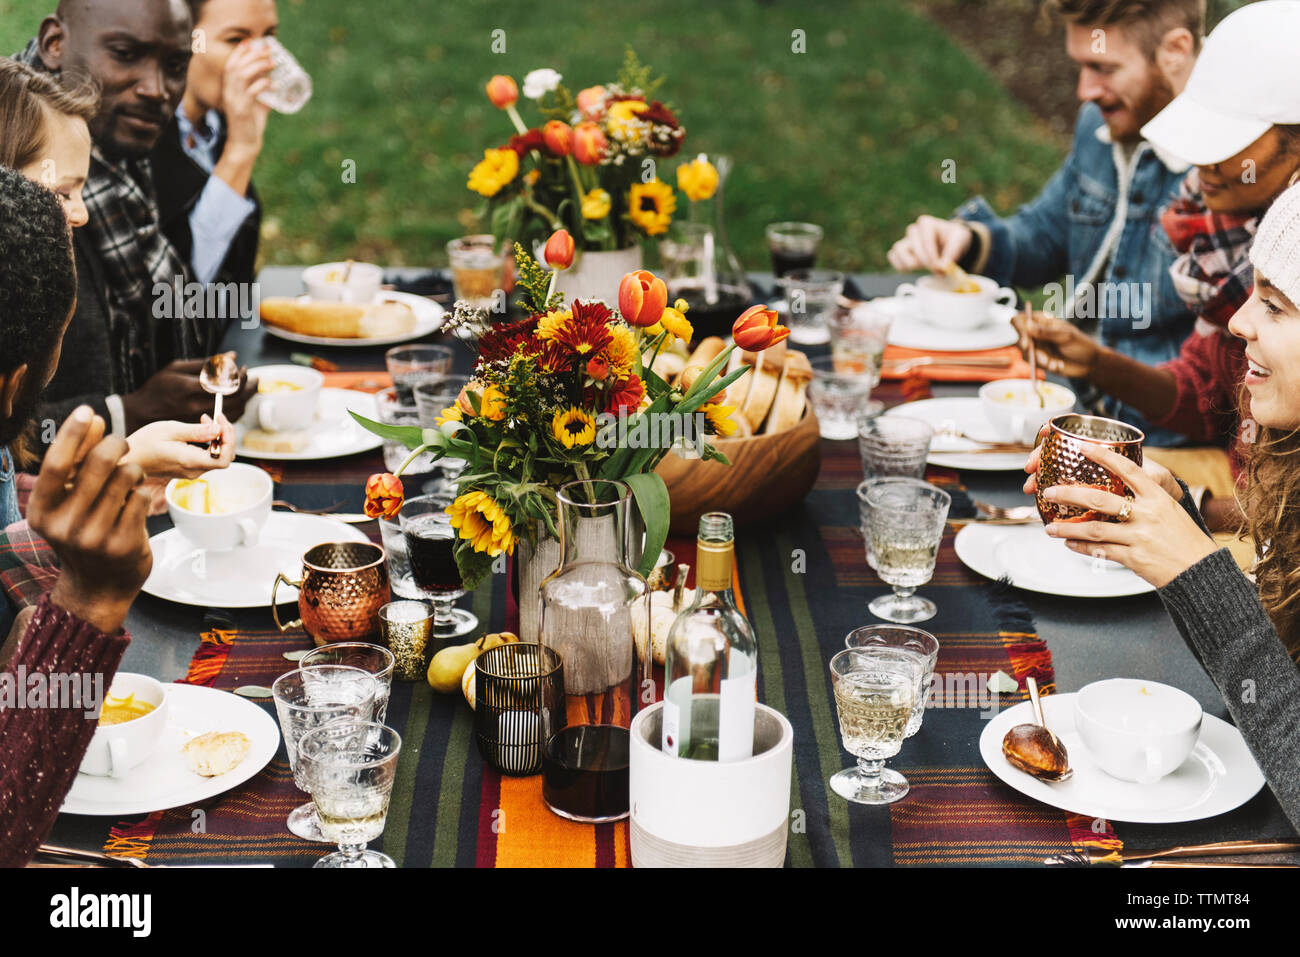 Friends eating food while sitting at table in backyard Stock Photo